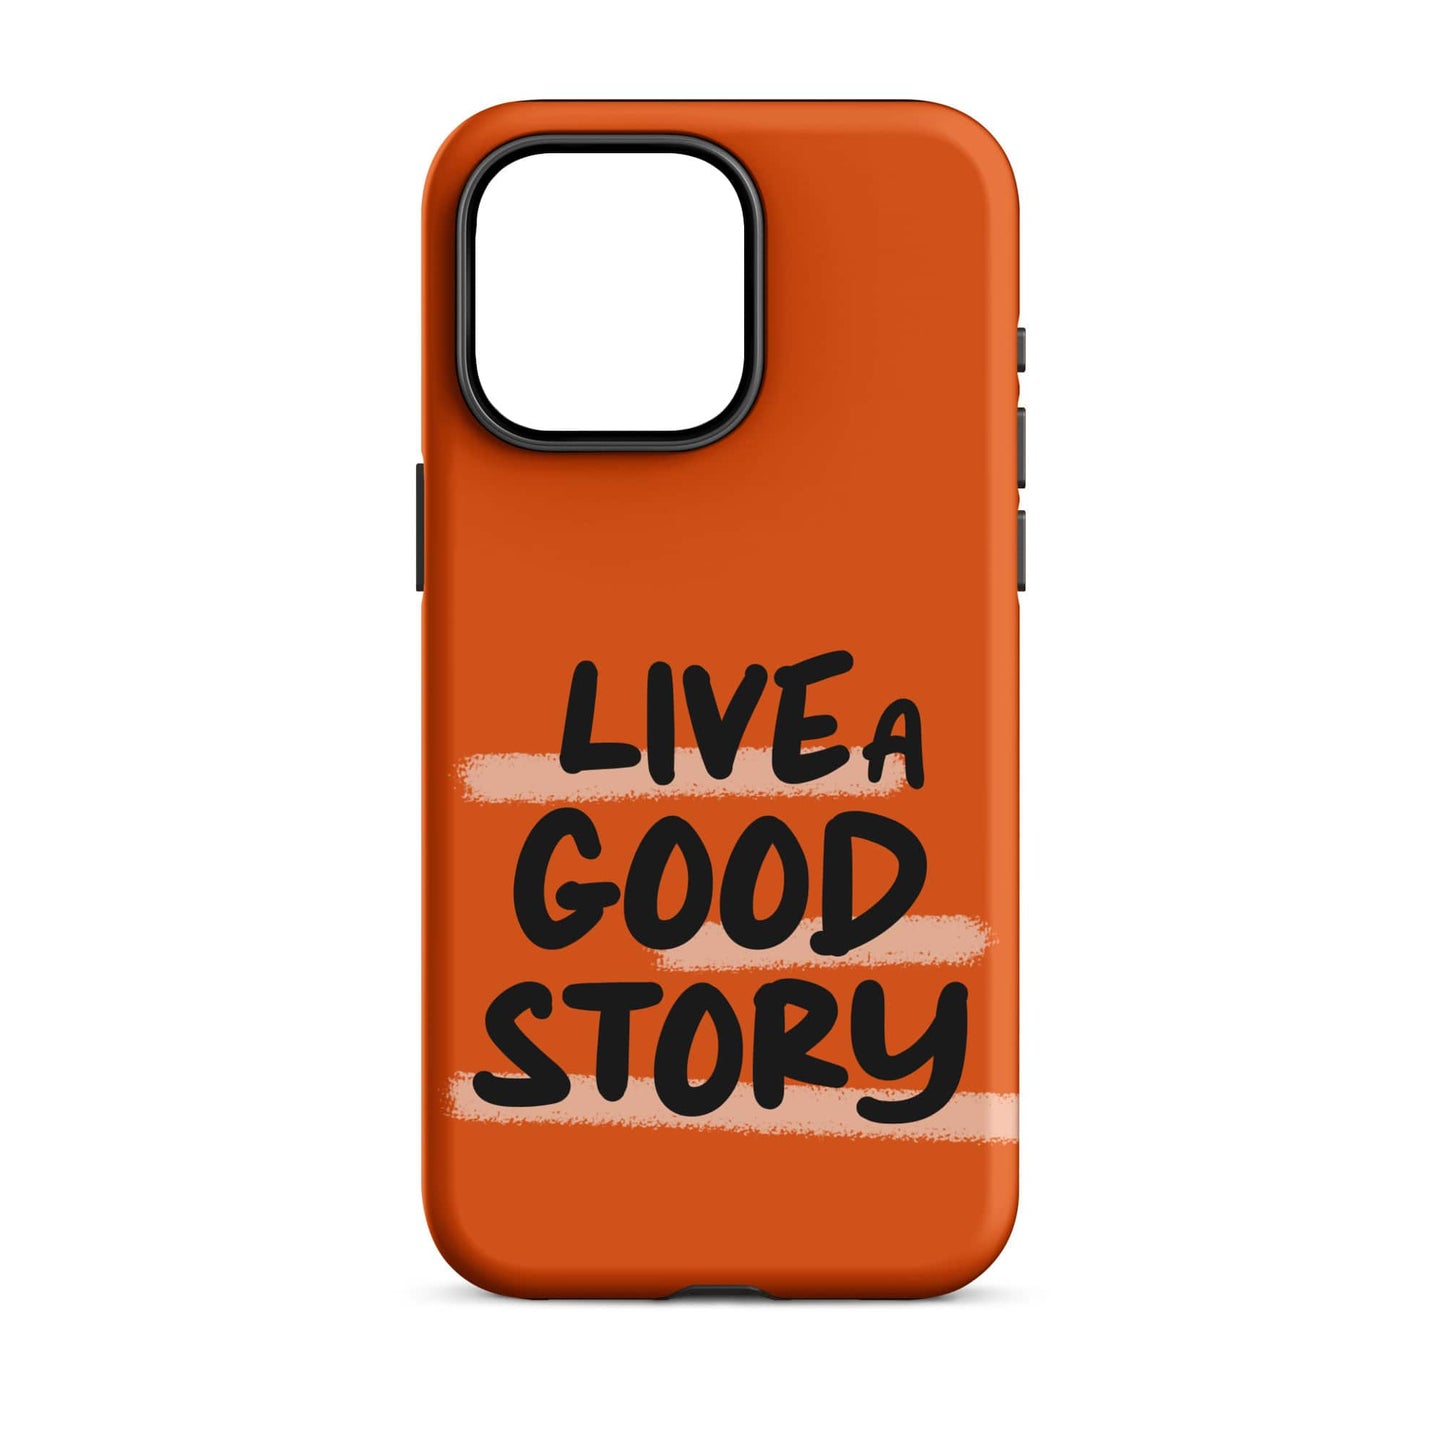 Live A Good Story - (Orange) Quoted iPhone Case